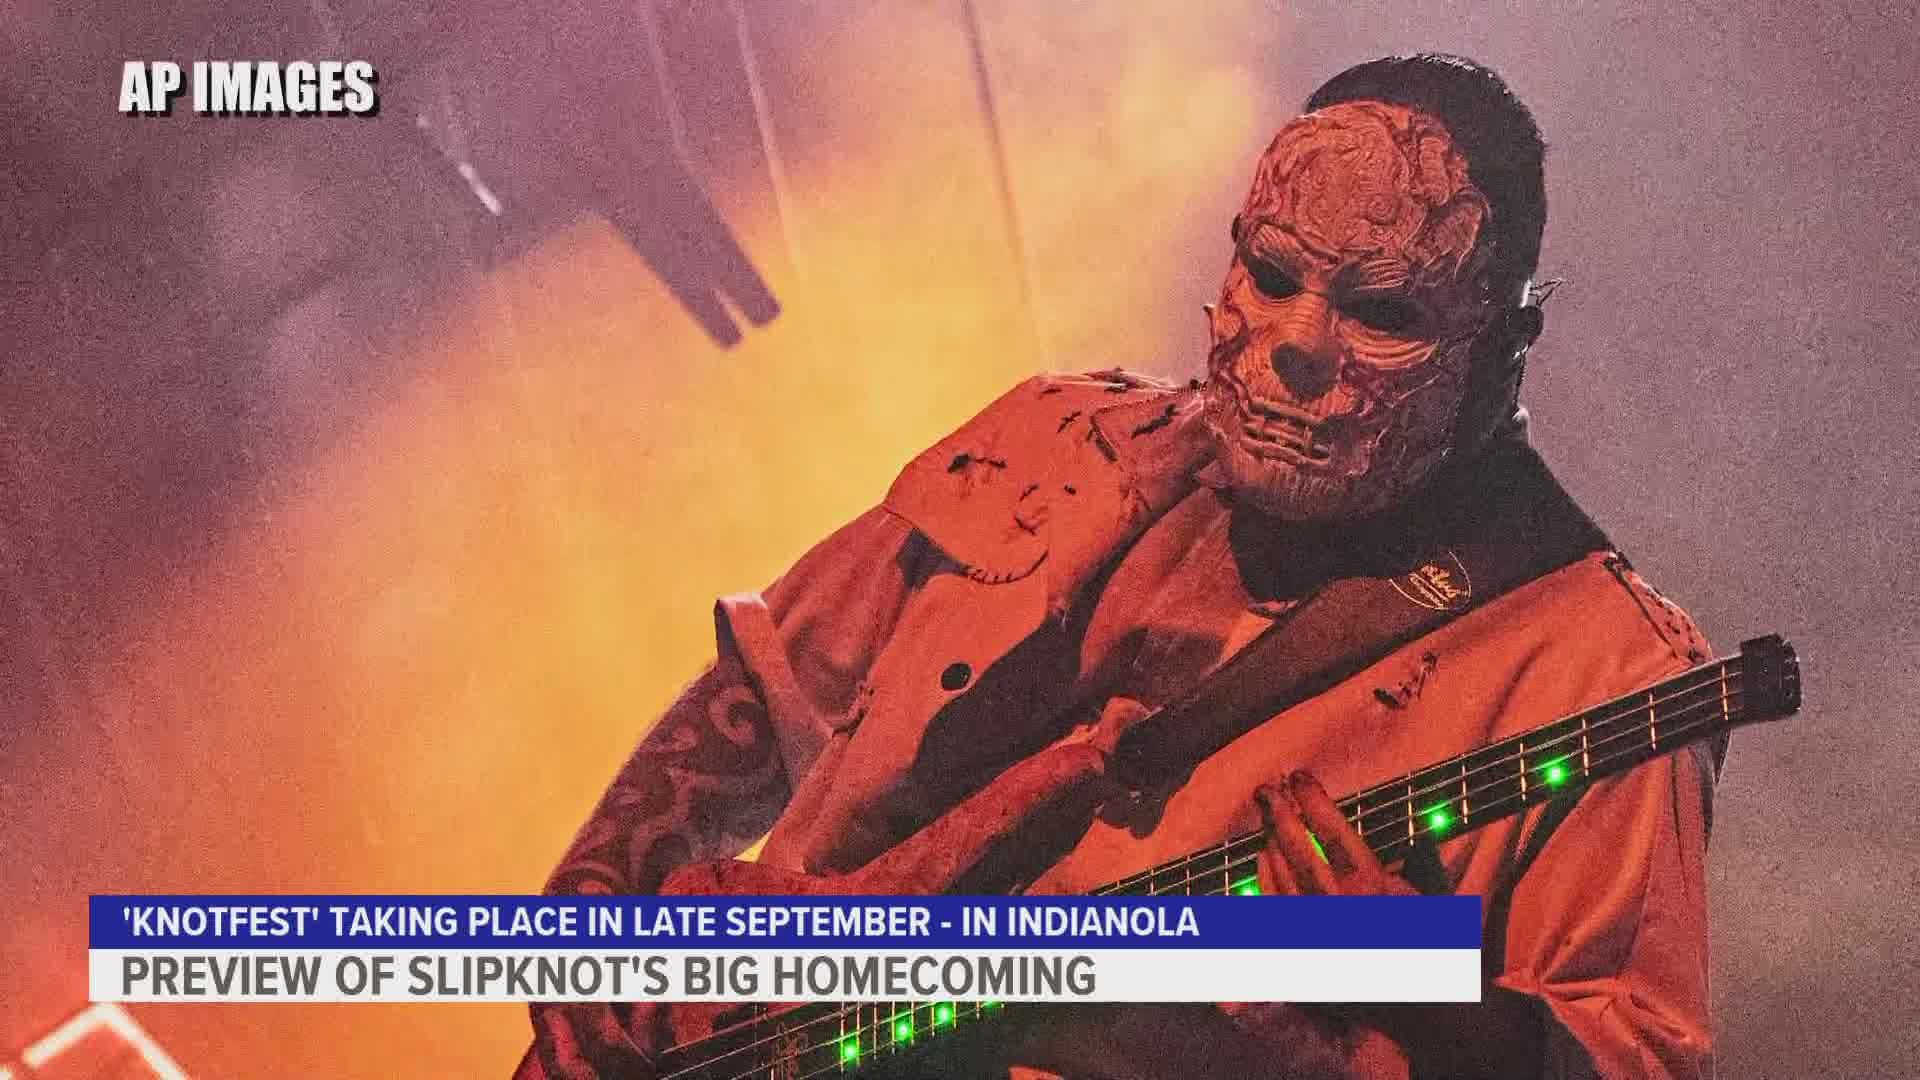 Slipknot's epic homecoming concert will feature several bands. Tickets go on sale to the general public on June 4 at 10 a.m.